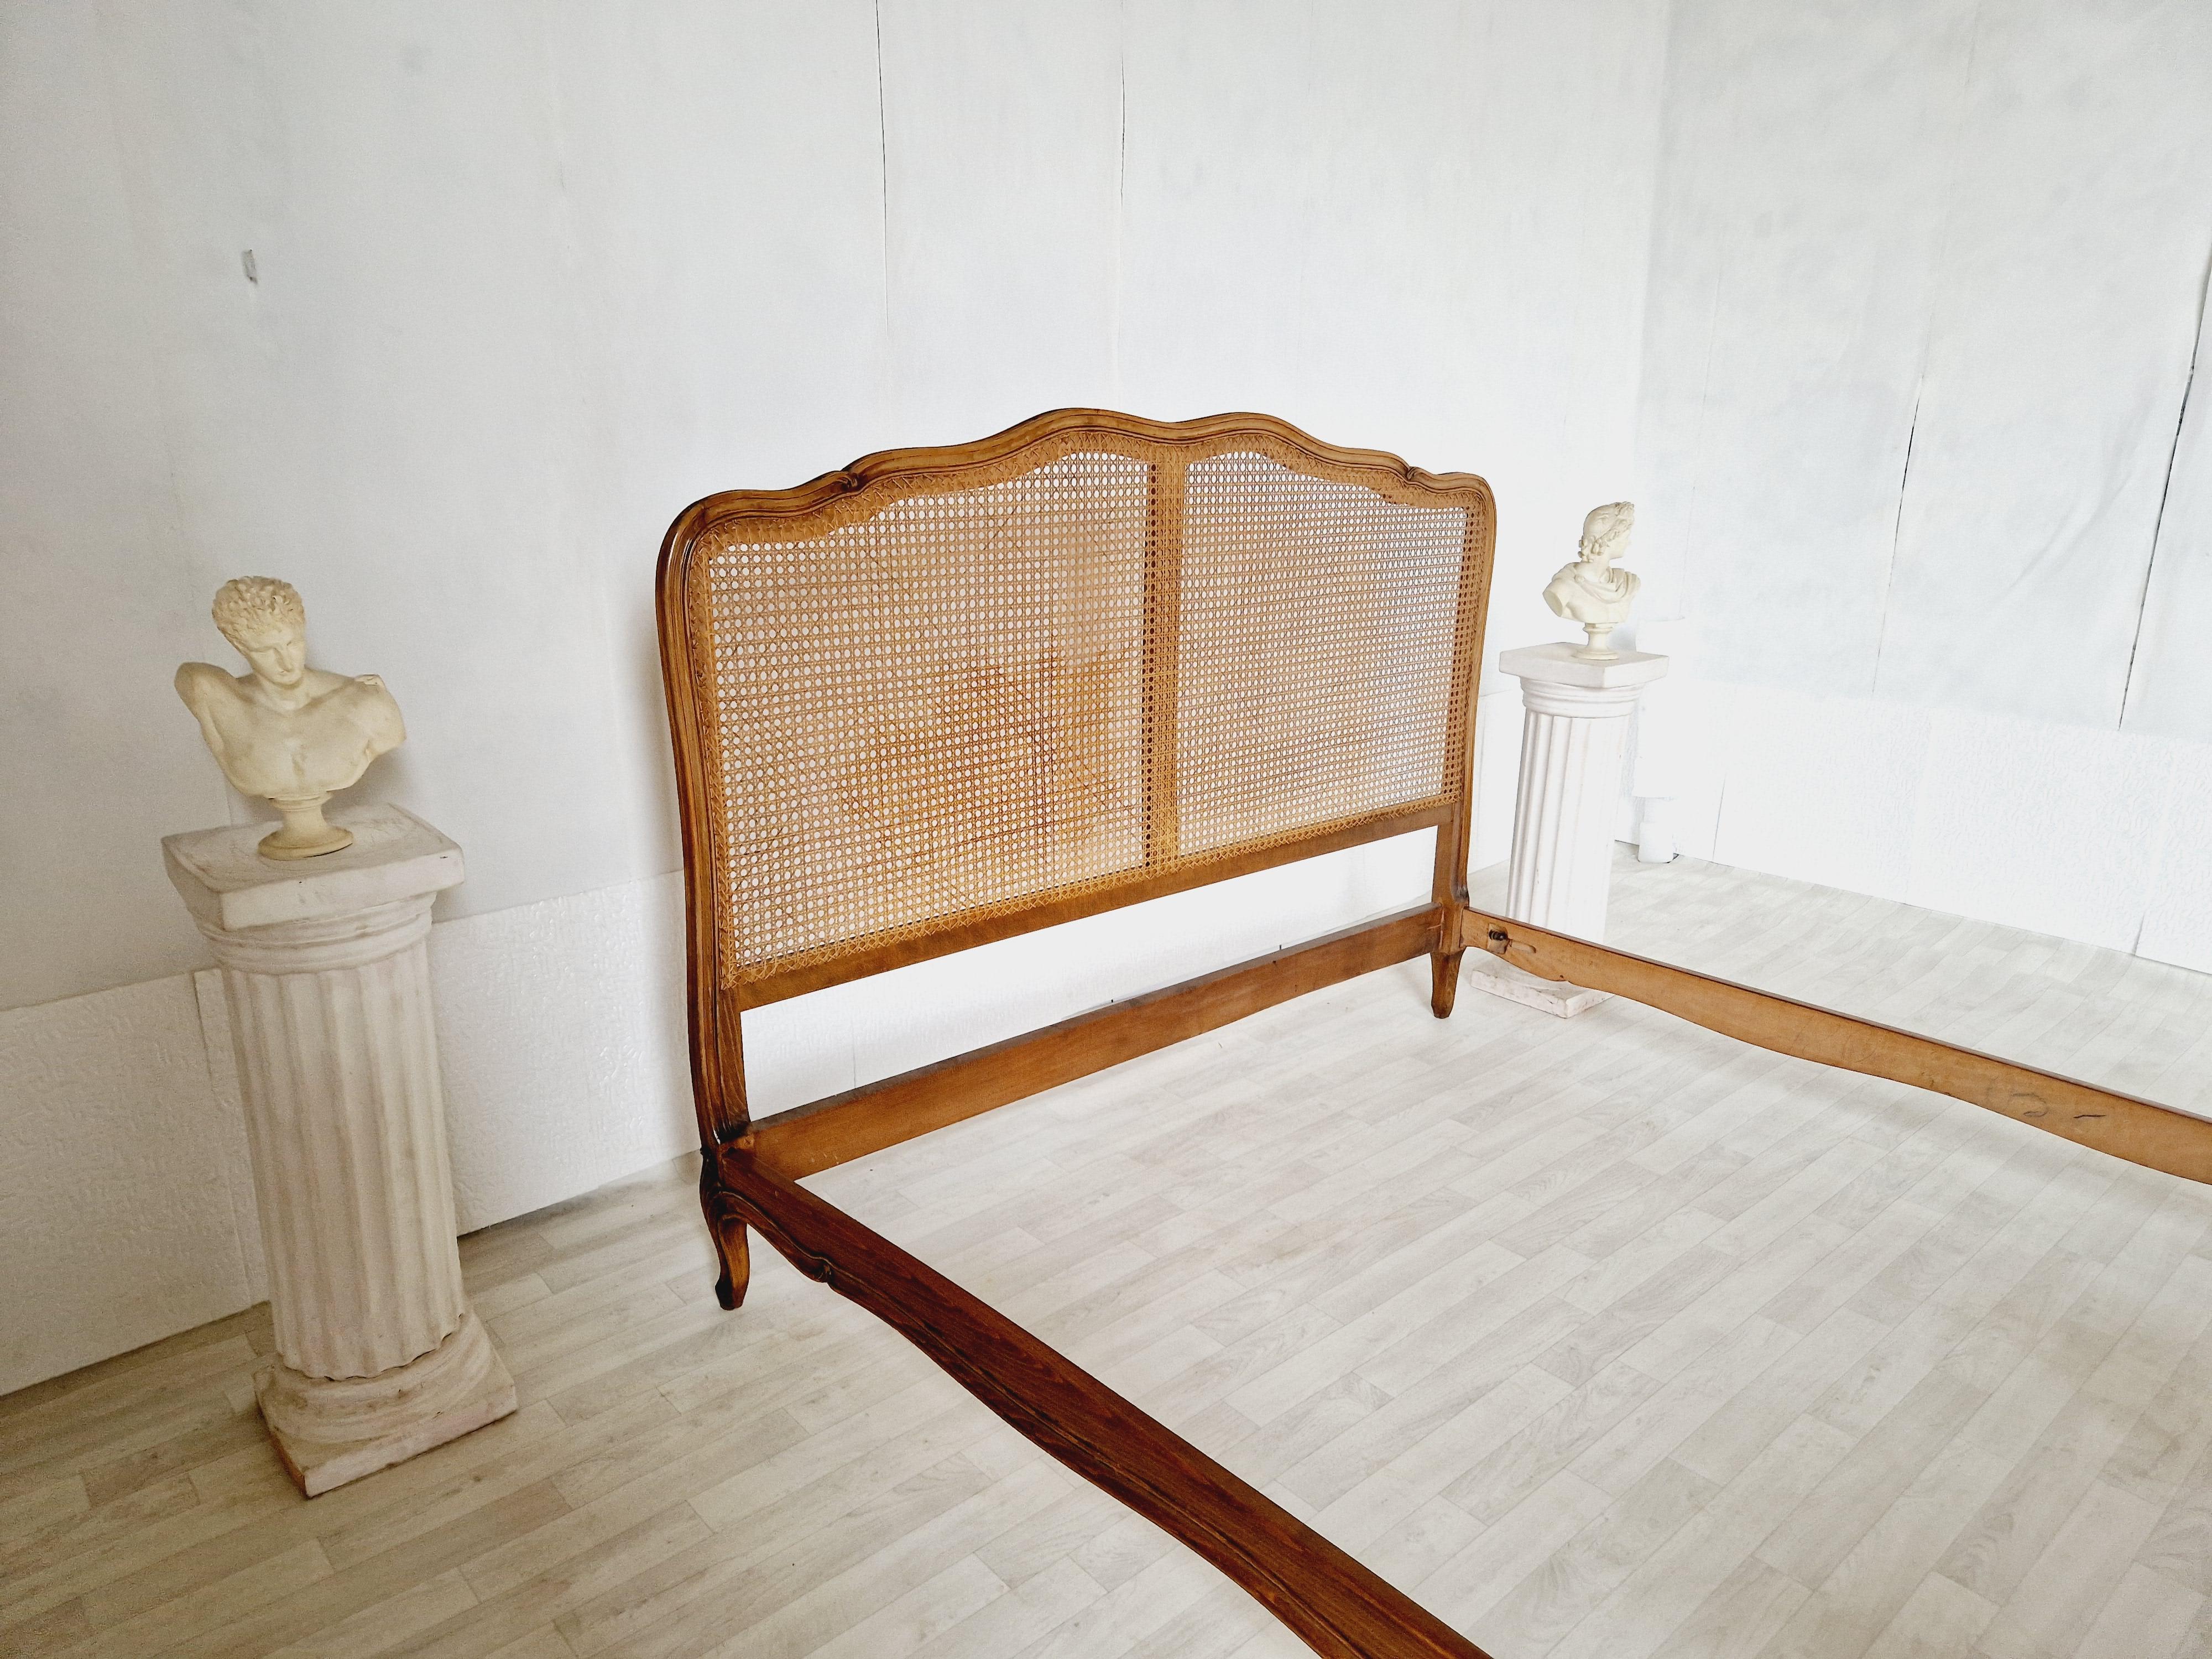 20th Century Antique Cane French Bed Corbeille Louis XV Style